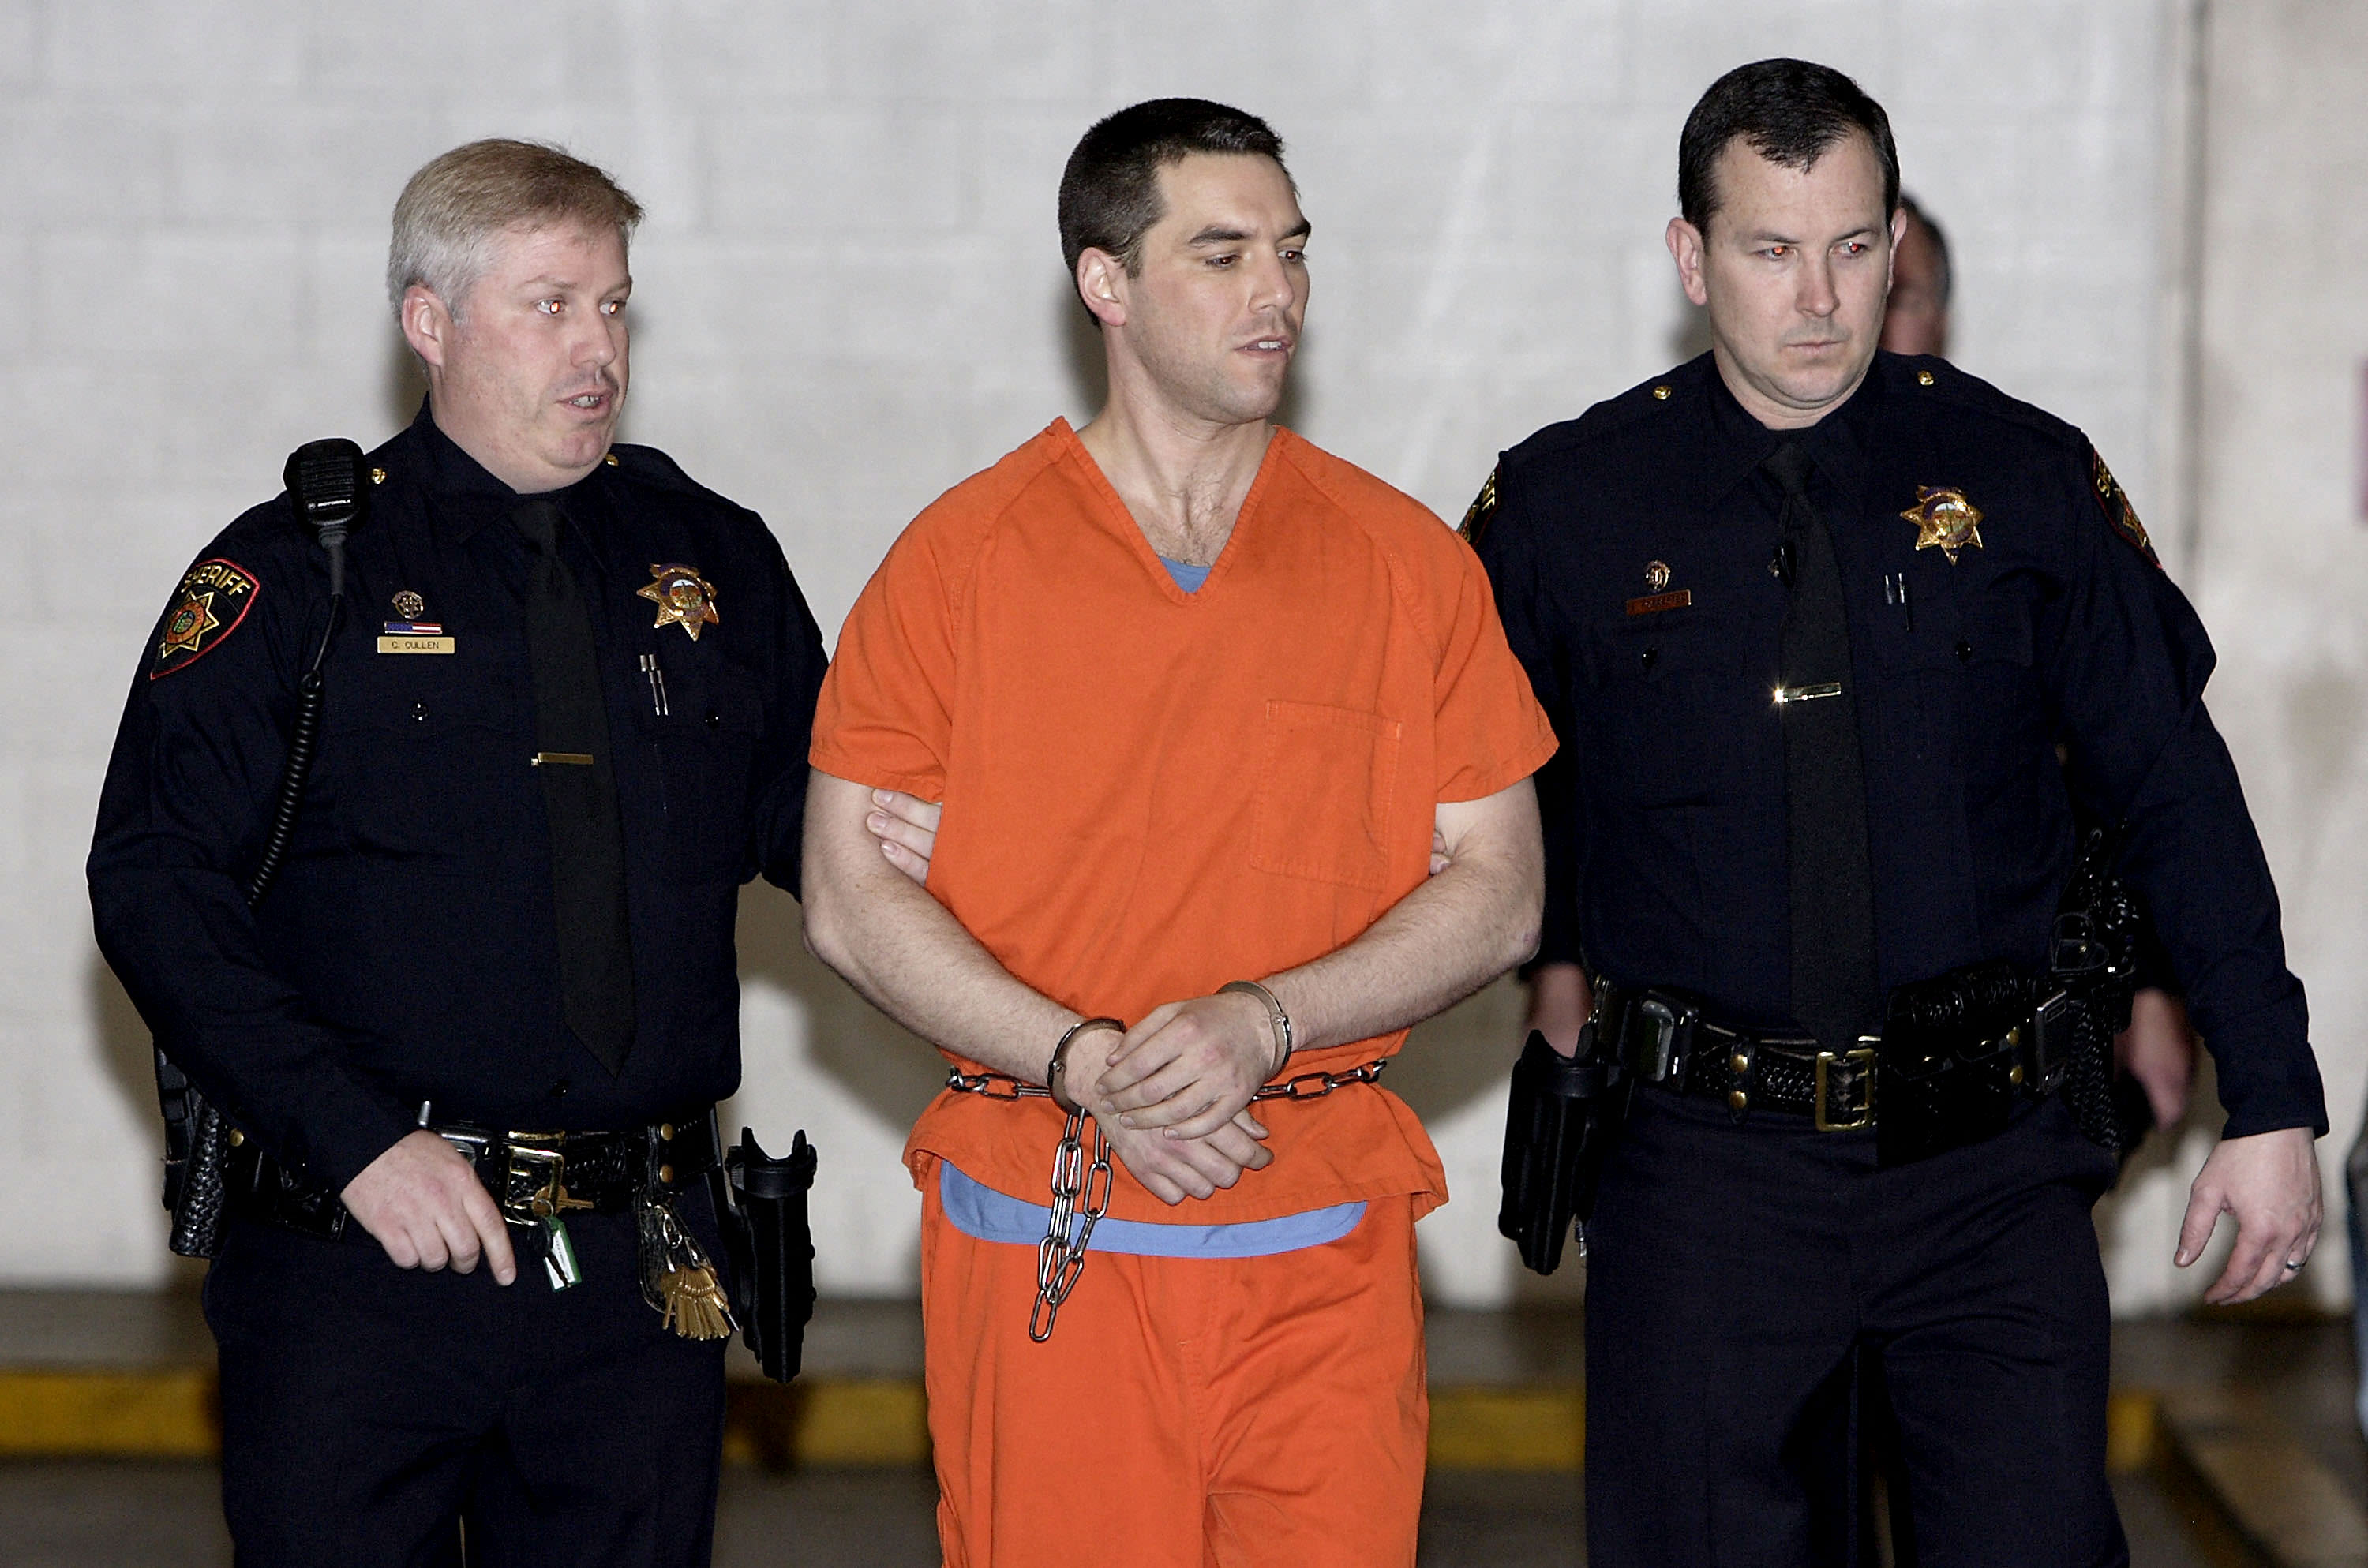 Innocence Project pushes for new trial in Scott Peterson case